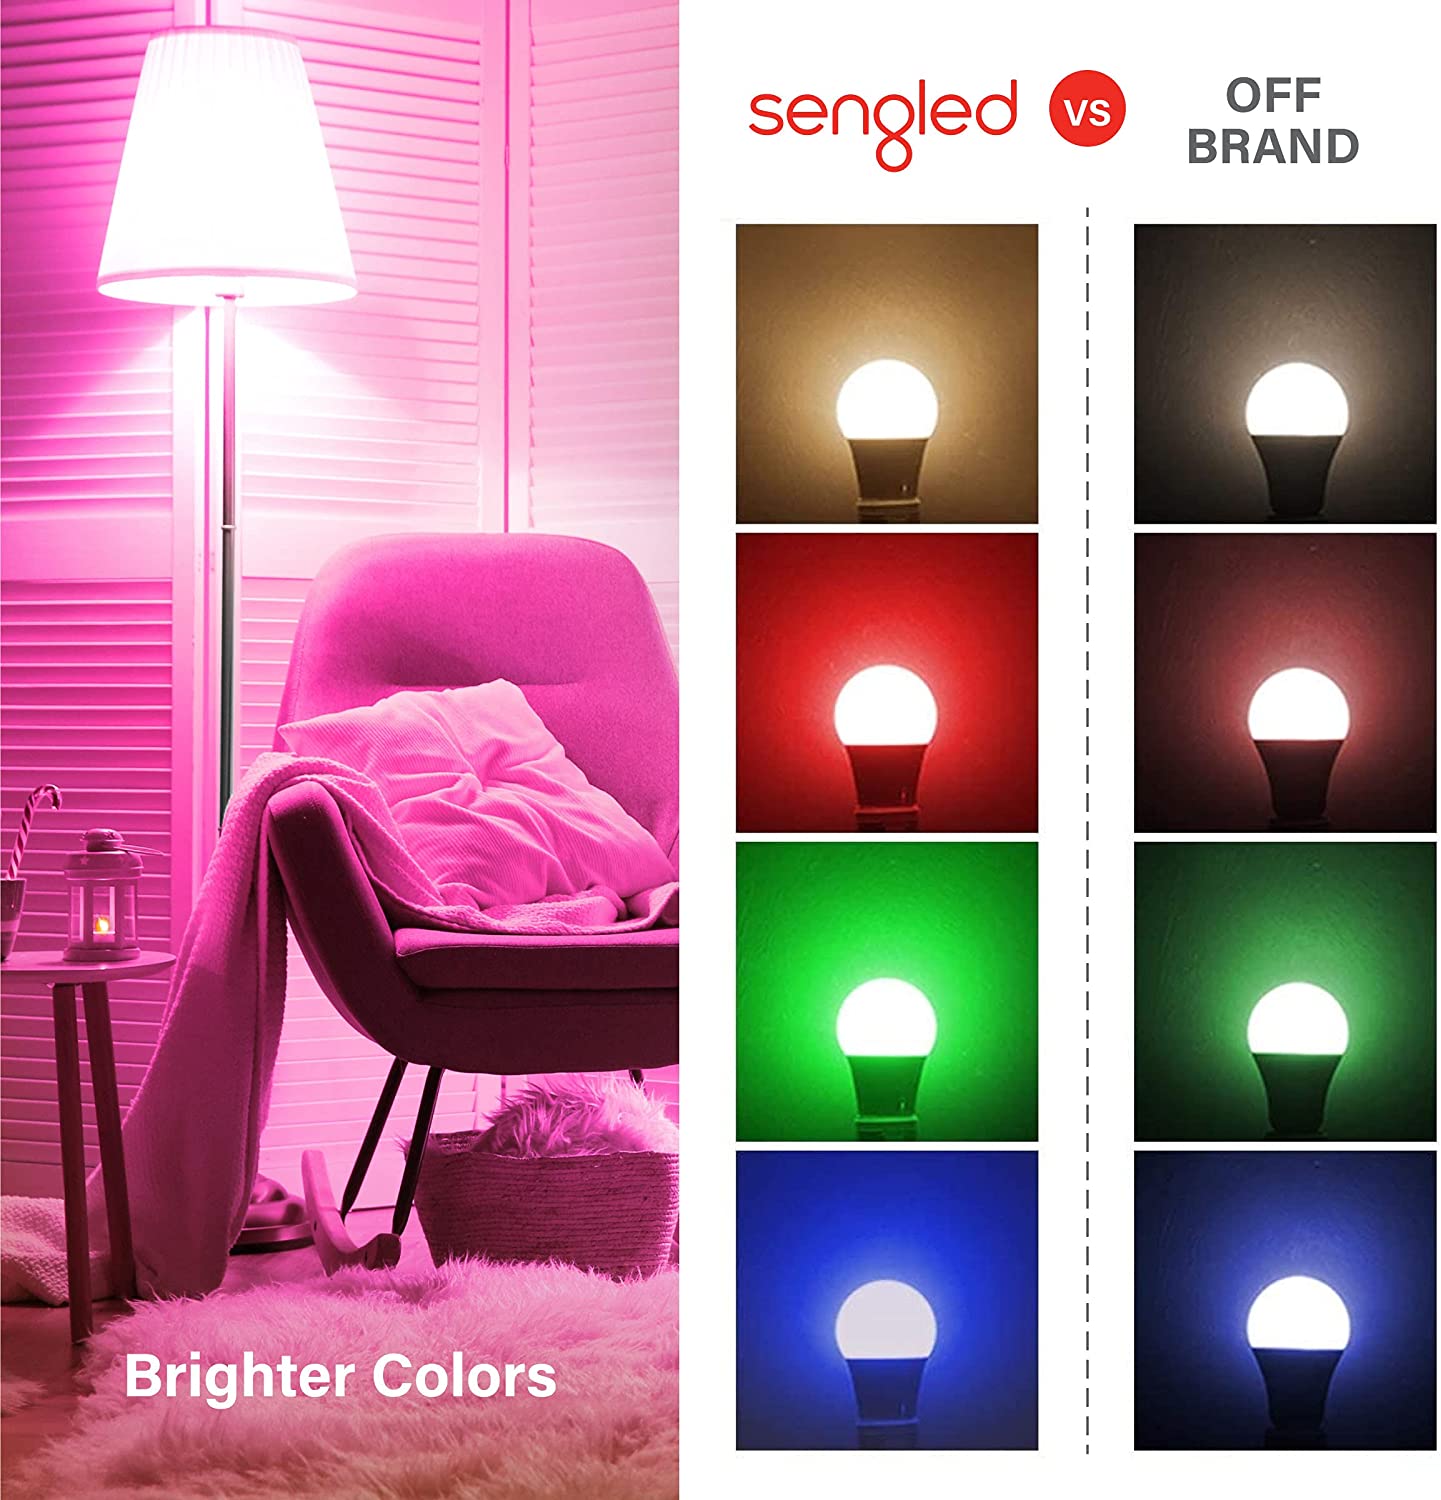 Sengled Smart Light Bulbs, Color Changing Alexa Light Bulb Bluetooth Mesh, Smart Bulbs That Work with Alexa Only, Dimmable LED Bulb A19 E26 Multicolor, High CRI, High Brightness, 8.7W 800LM, 1Pack